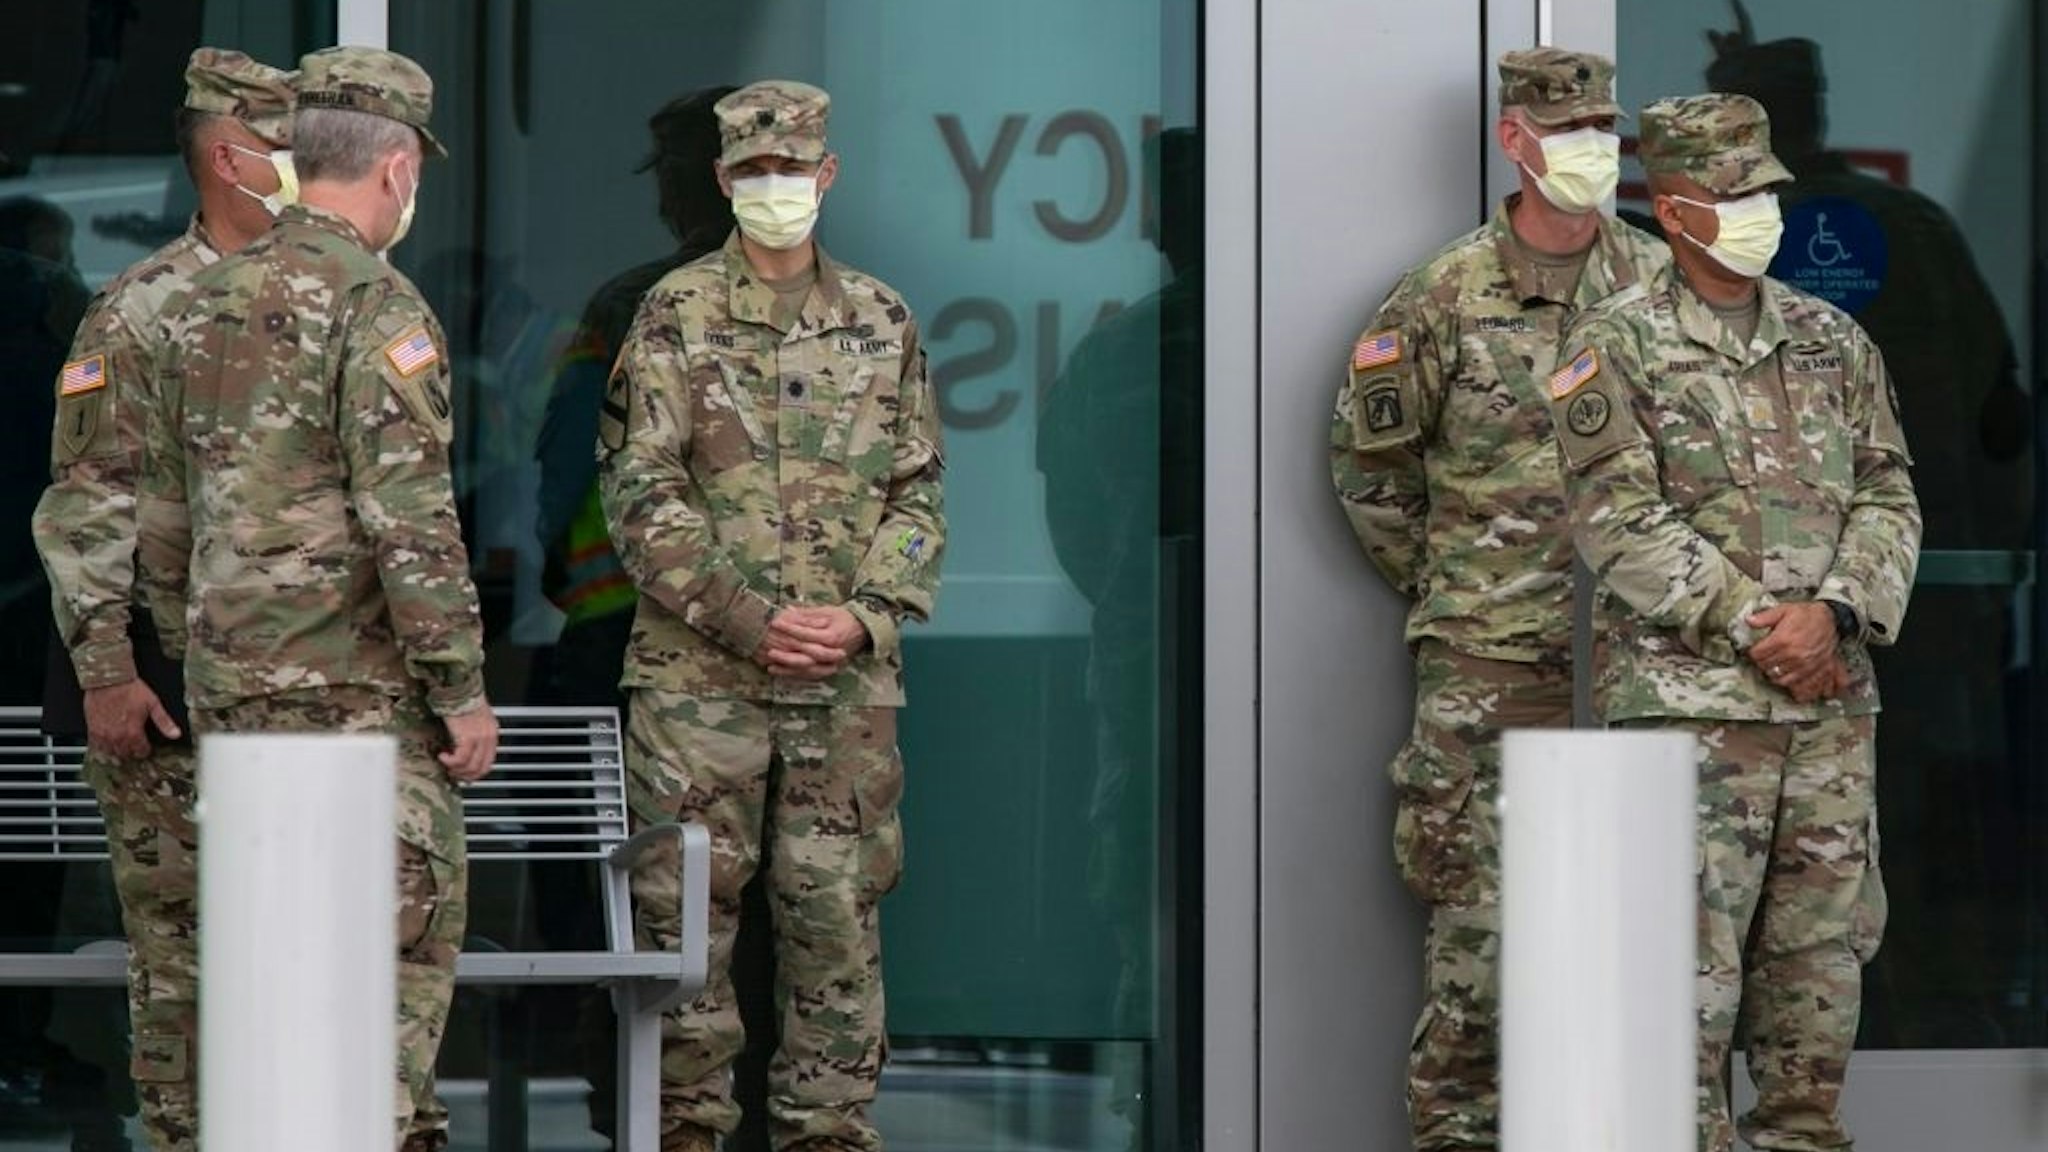 MIAMI BEACH, FL - APRIL 8: Members of the U.S. Army Corps of Engineers stand outside the Miami Beach Convention Center as they build a coronavirus field hospital inside the facility on April 8, 2020 in Miami Beach, Florida.